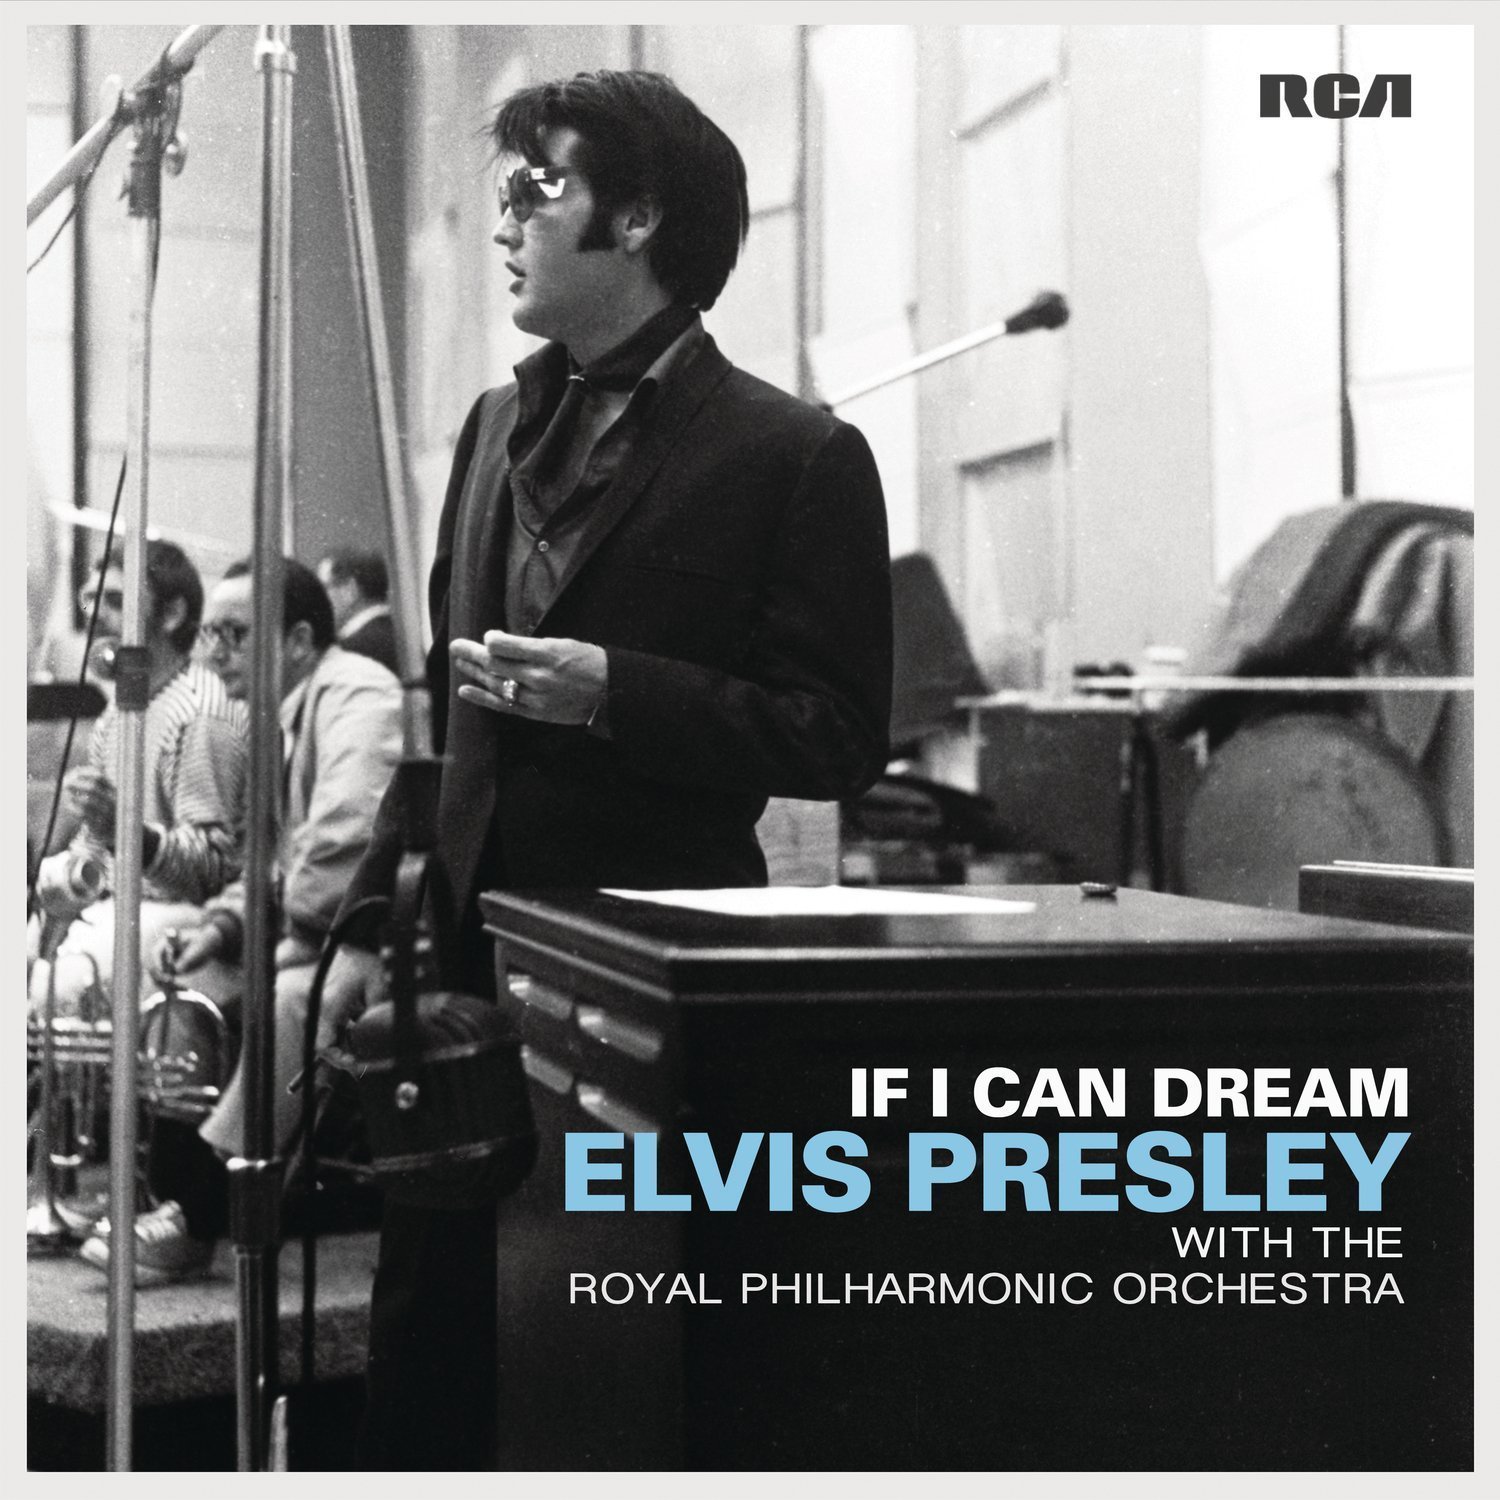 Disque vinyle Elvis Presley If I Can Dream: Elvis Presley With the Royal Philharmonic Orchestra (2 LP)